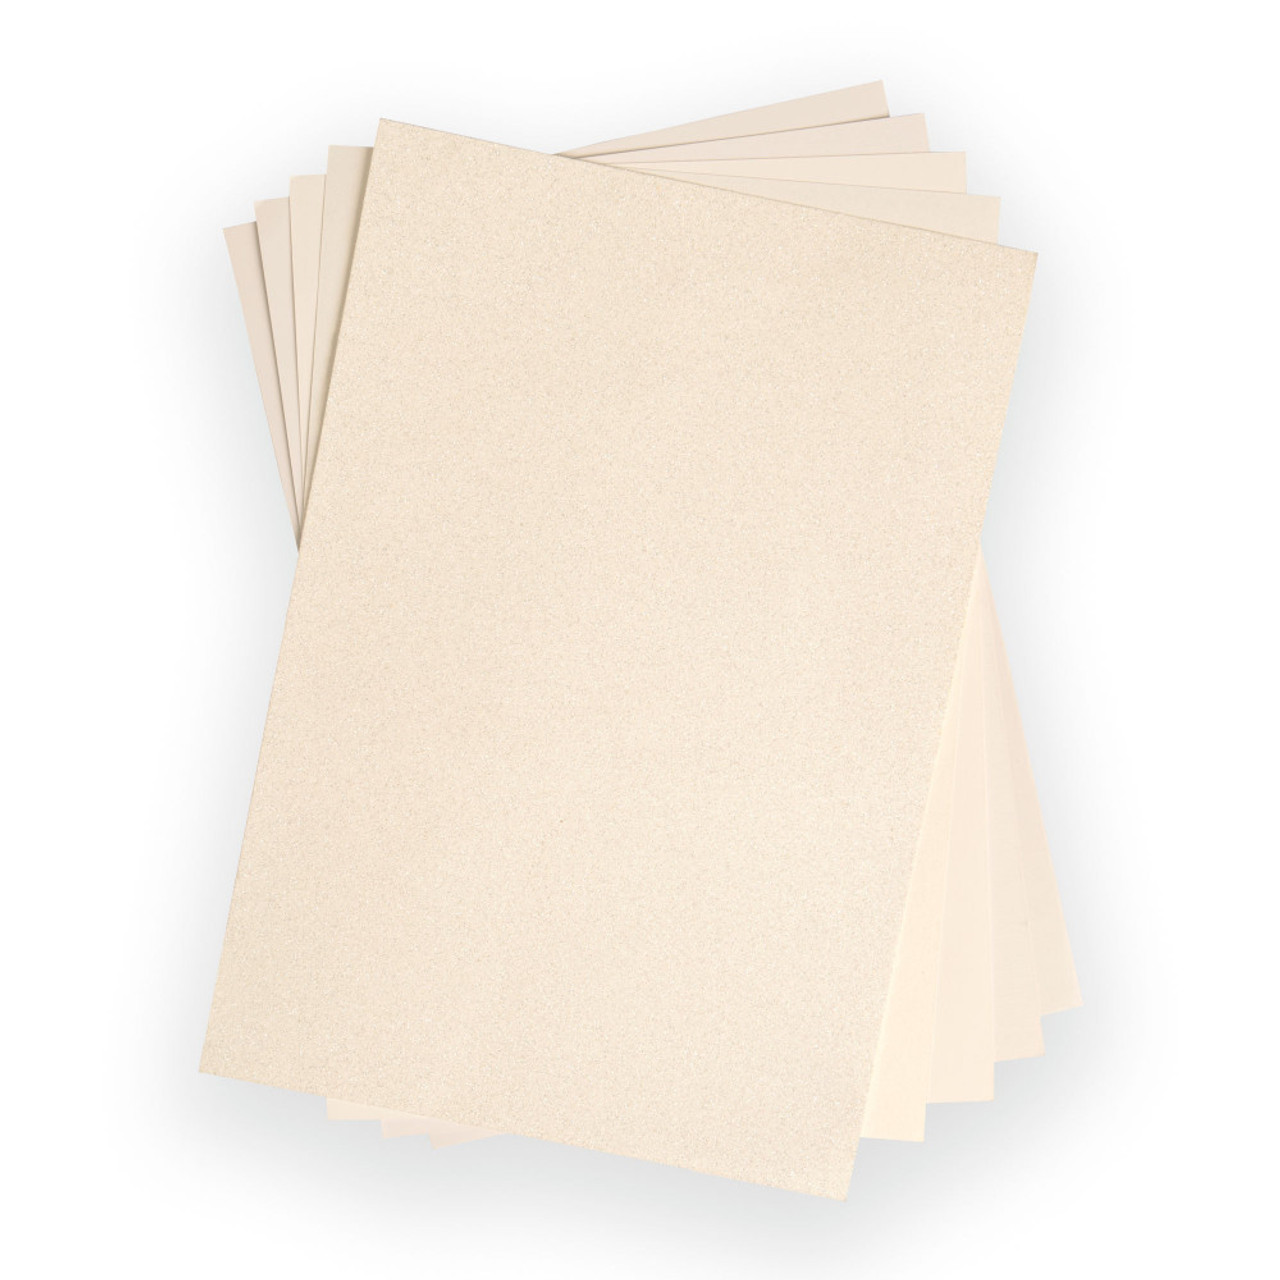 Sizzix Surfacez - Cardstock, 8 1/4 x 11 3/4, White, 60 Sheets -  Scrapbooking Made Simple